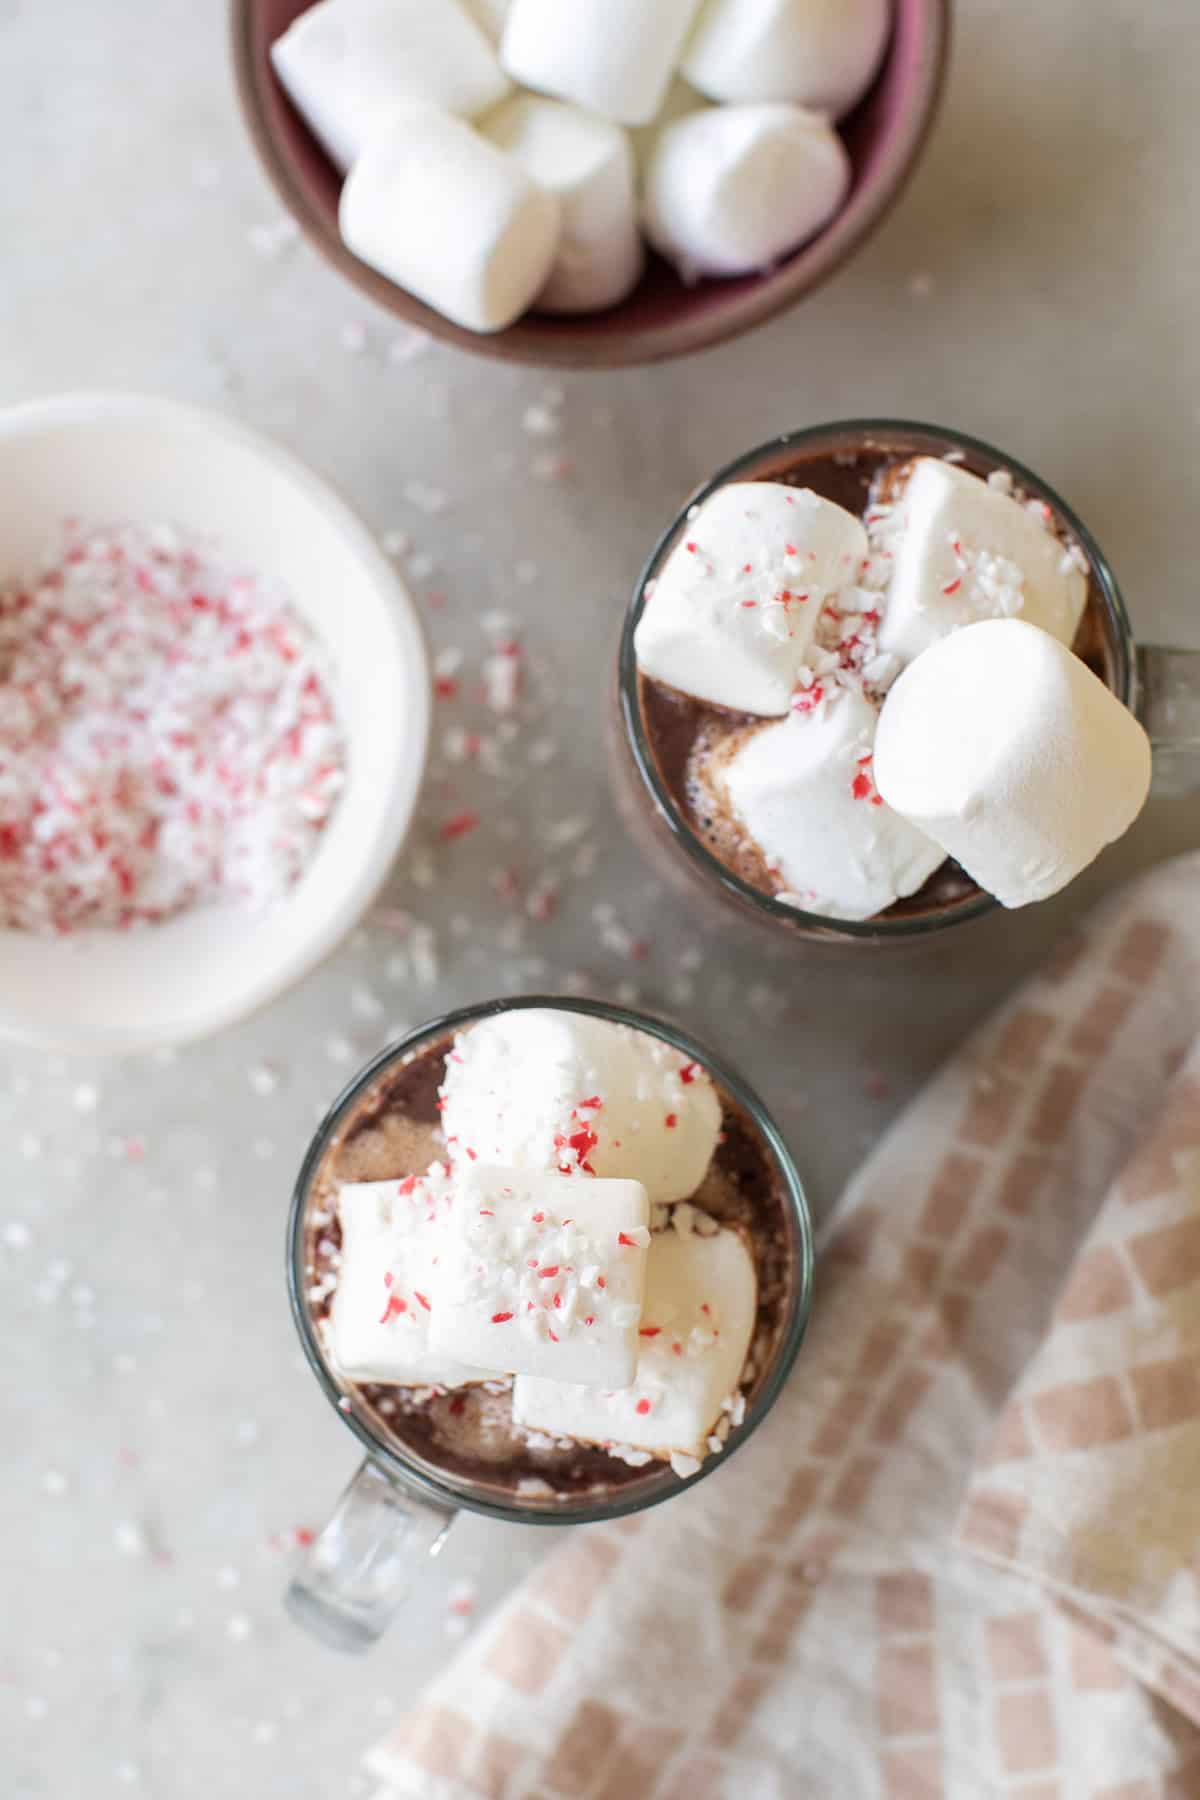 Hot chocolate with peppermint and marshmallows.